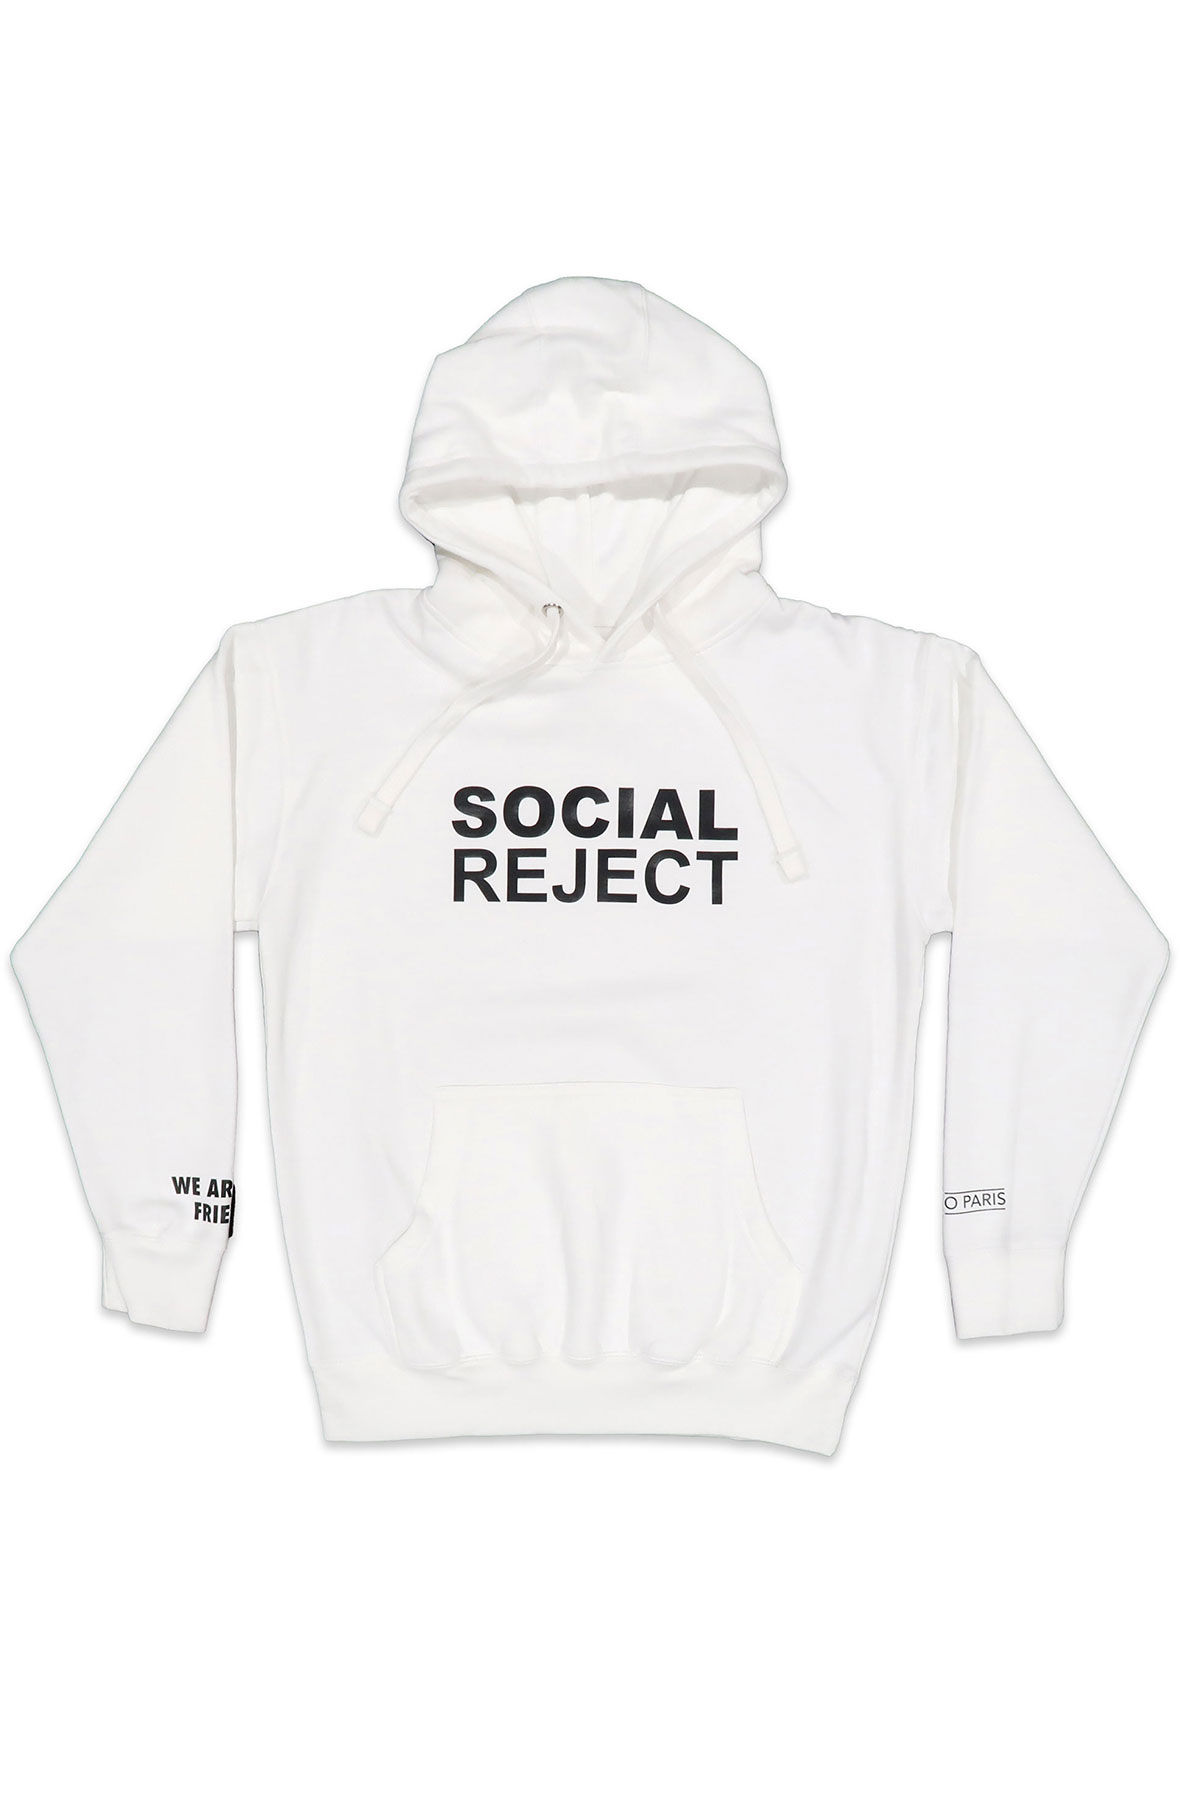 social reject hoodie in white and black